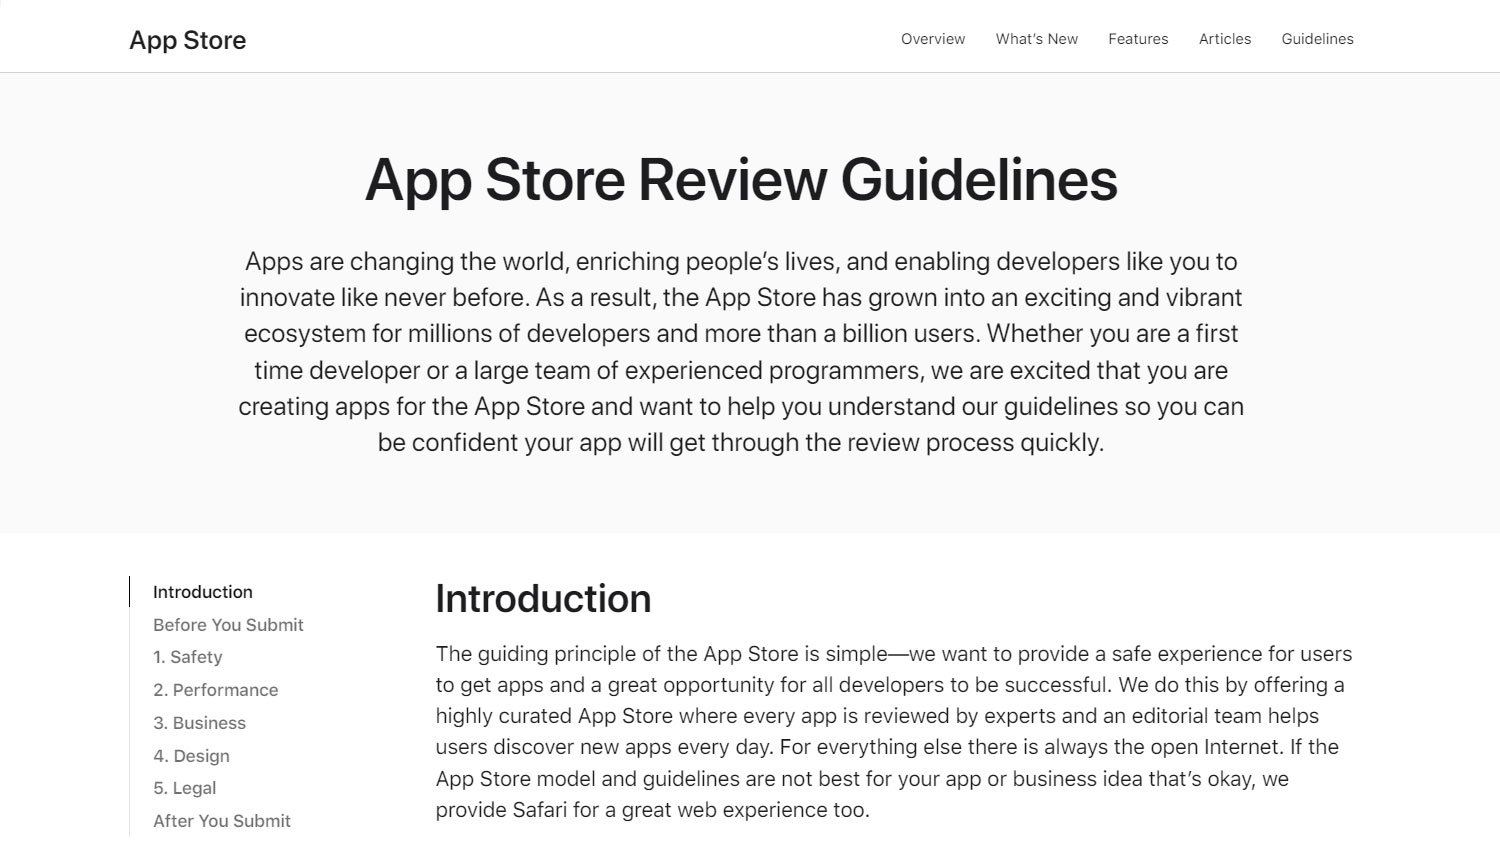 iOS App Store’s Review Policies